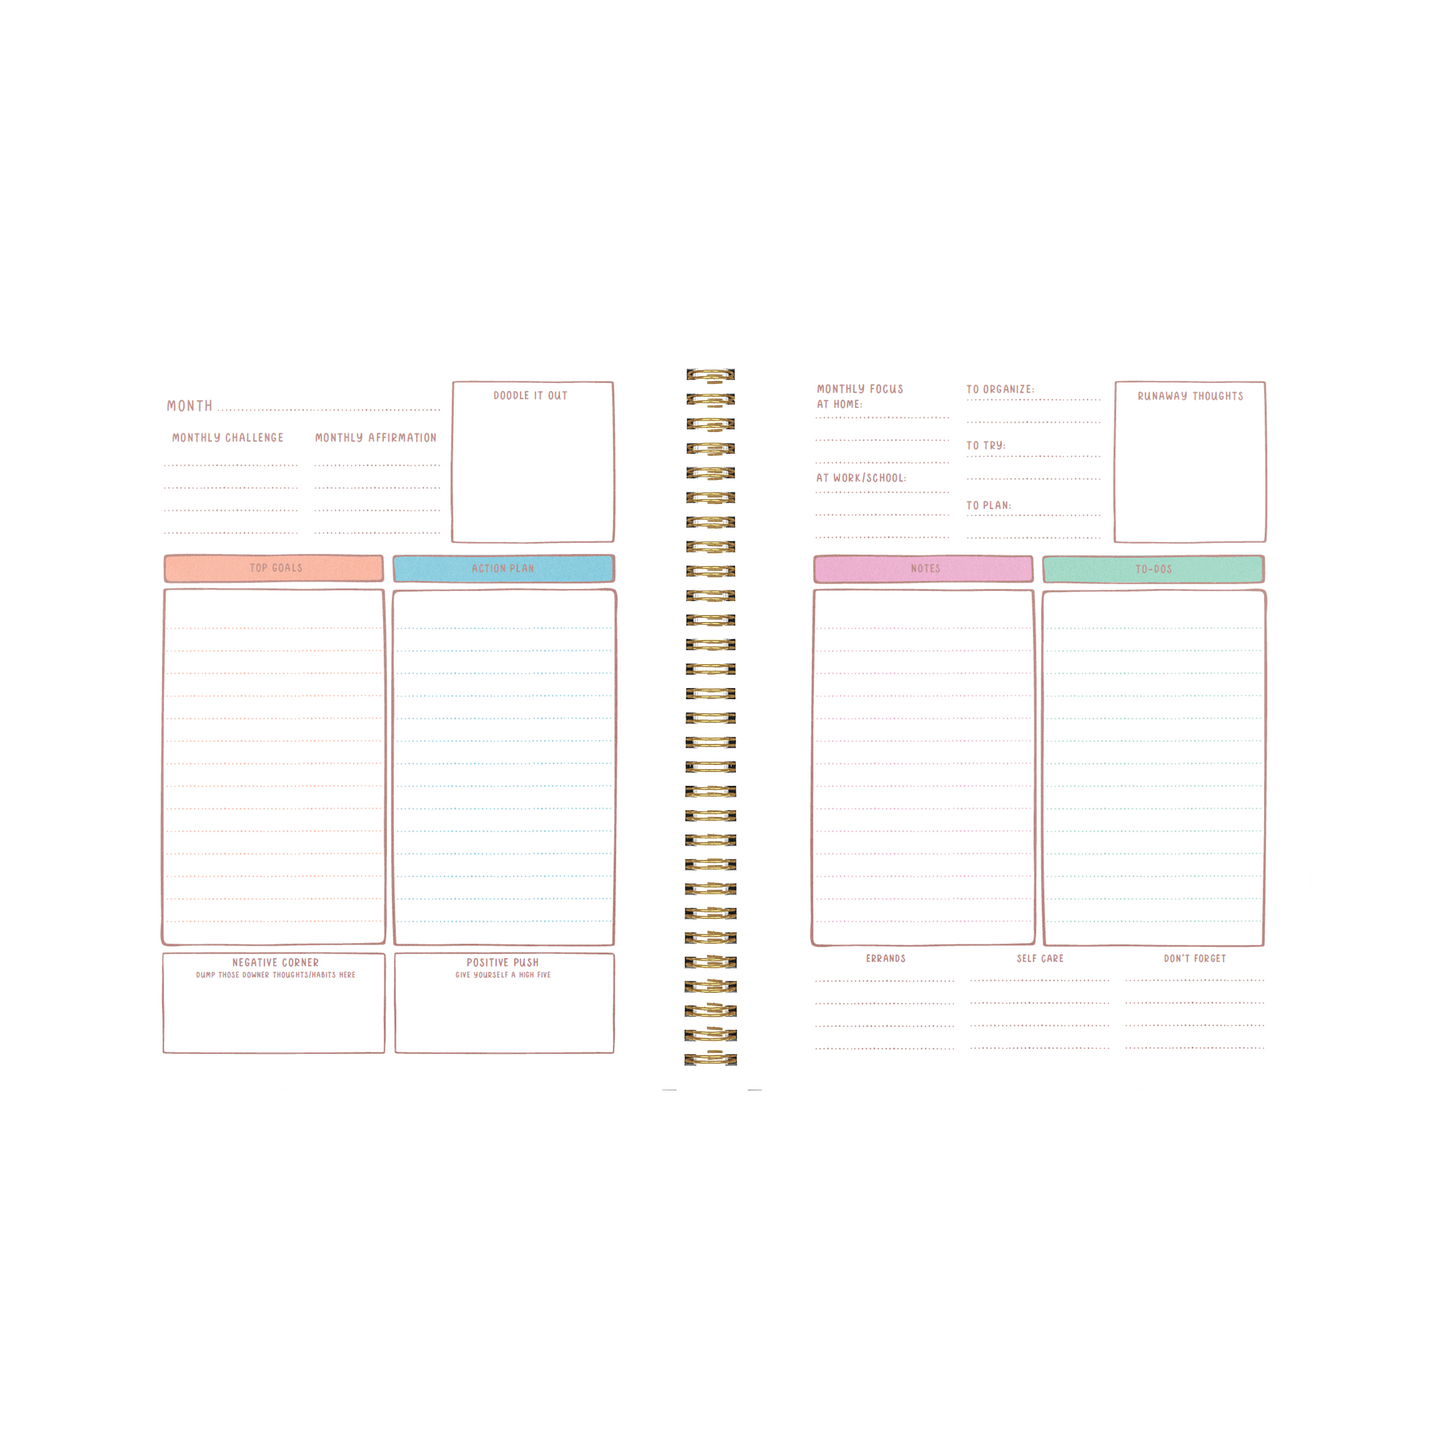 Goal Getter Undated Planner: Getting Shit Done